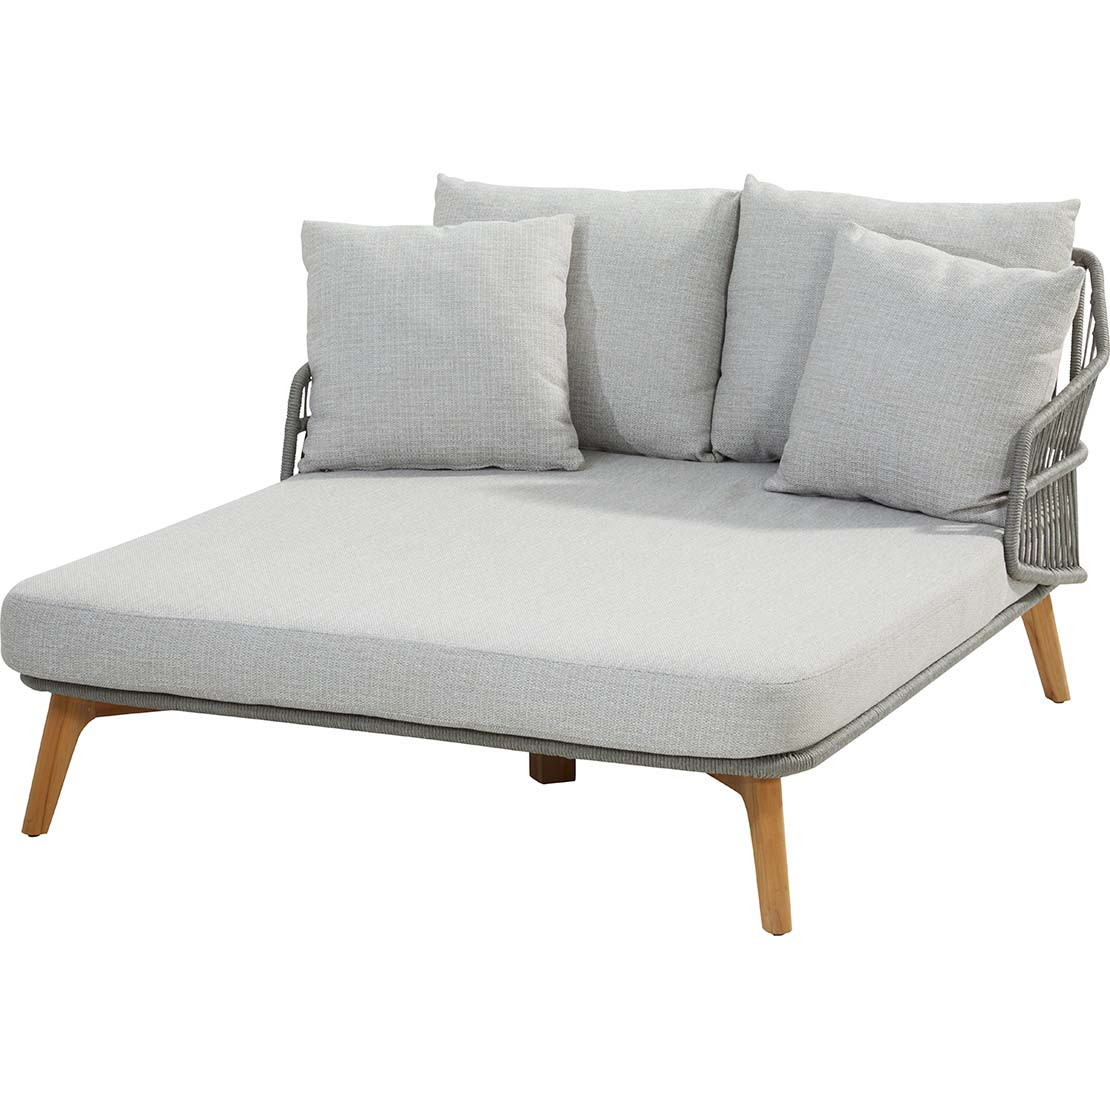 Sempre Daybed Teak Silver Grey with 6 cushions